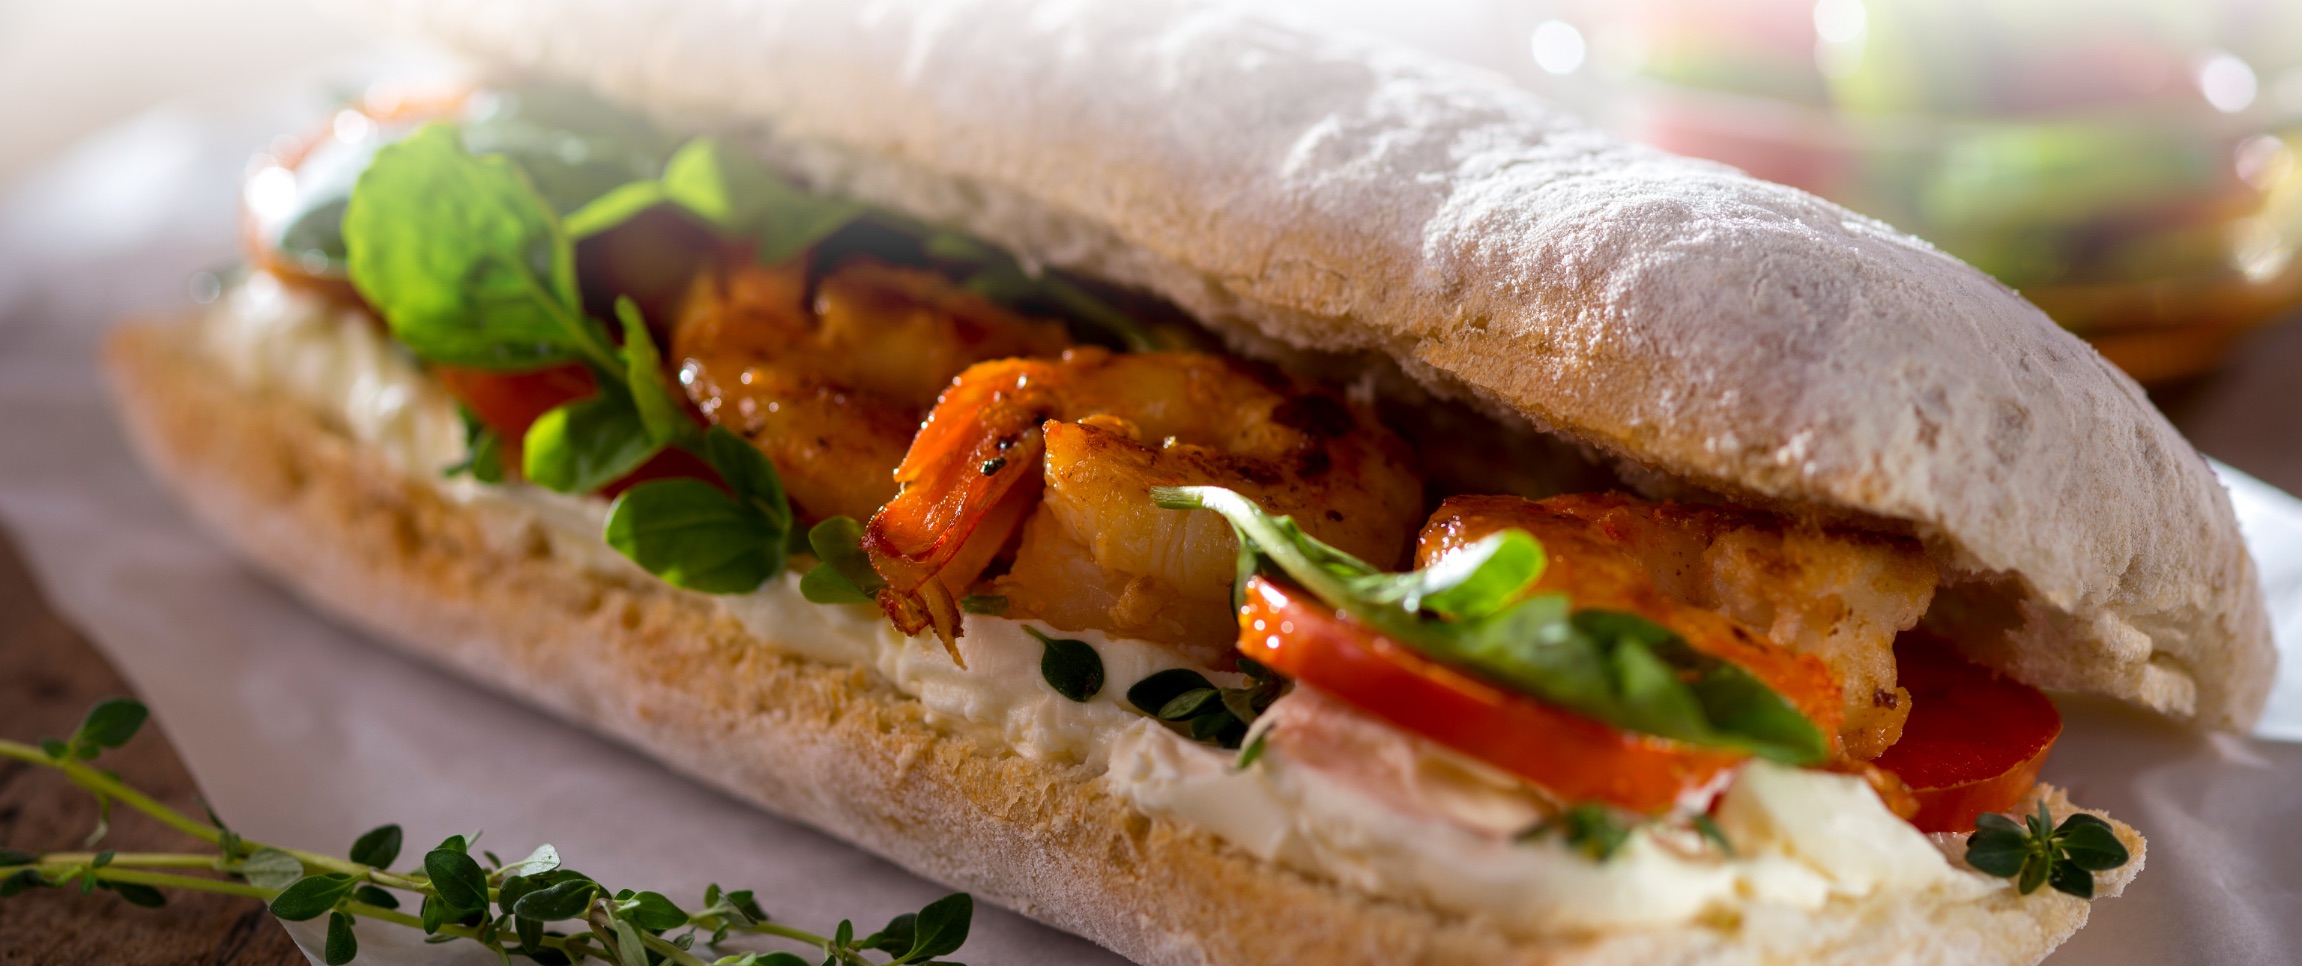 Grilled Shrimp and Tomato Salad Sandwich